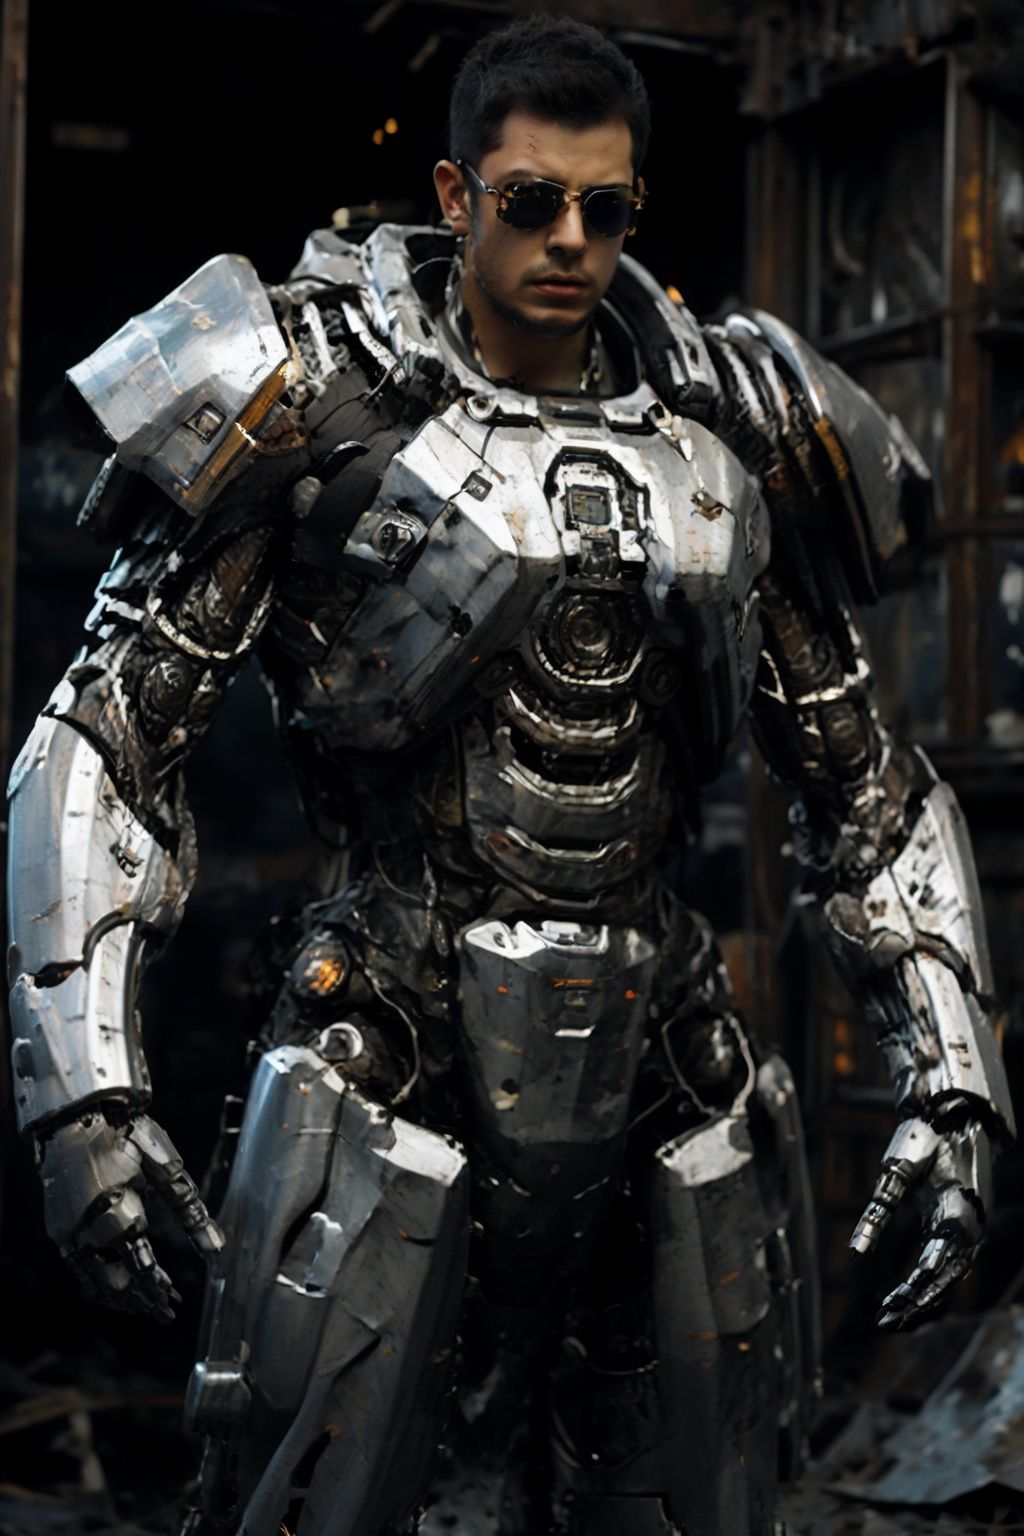 (HDR image), (high-definition image), (complex detail), (cinematic effect), (realistic style), (mecha), (sci-fi elements), (military equipment), (iron armor), (mechanical), (boy), (mecha costume), (weapon), (simple background), (flame effect), (action scene), (combat state), (mechanical arm), (highlight effect), (strong contrast), (sharp focus), (solid color background), (creativity), (accurate detail), (black sunglasses: 1.5), (exquisite craftsmanship)